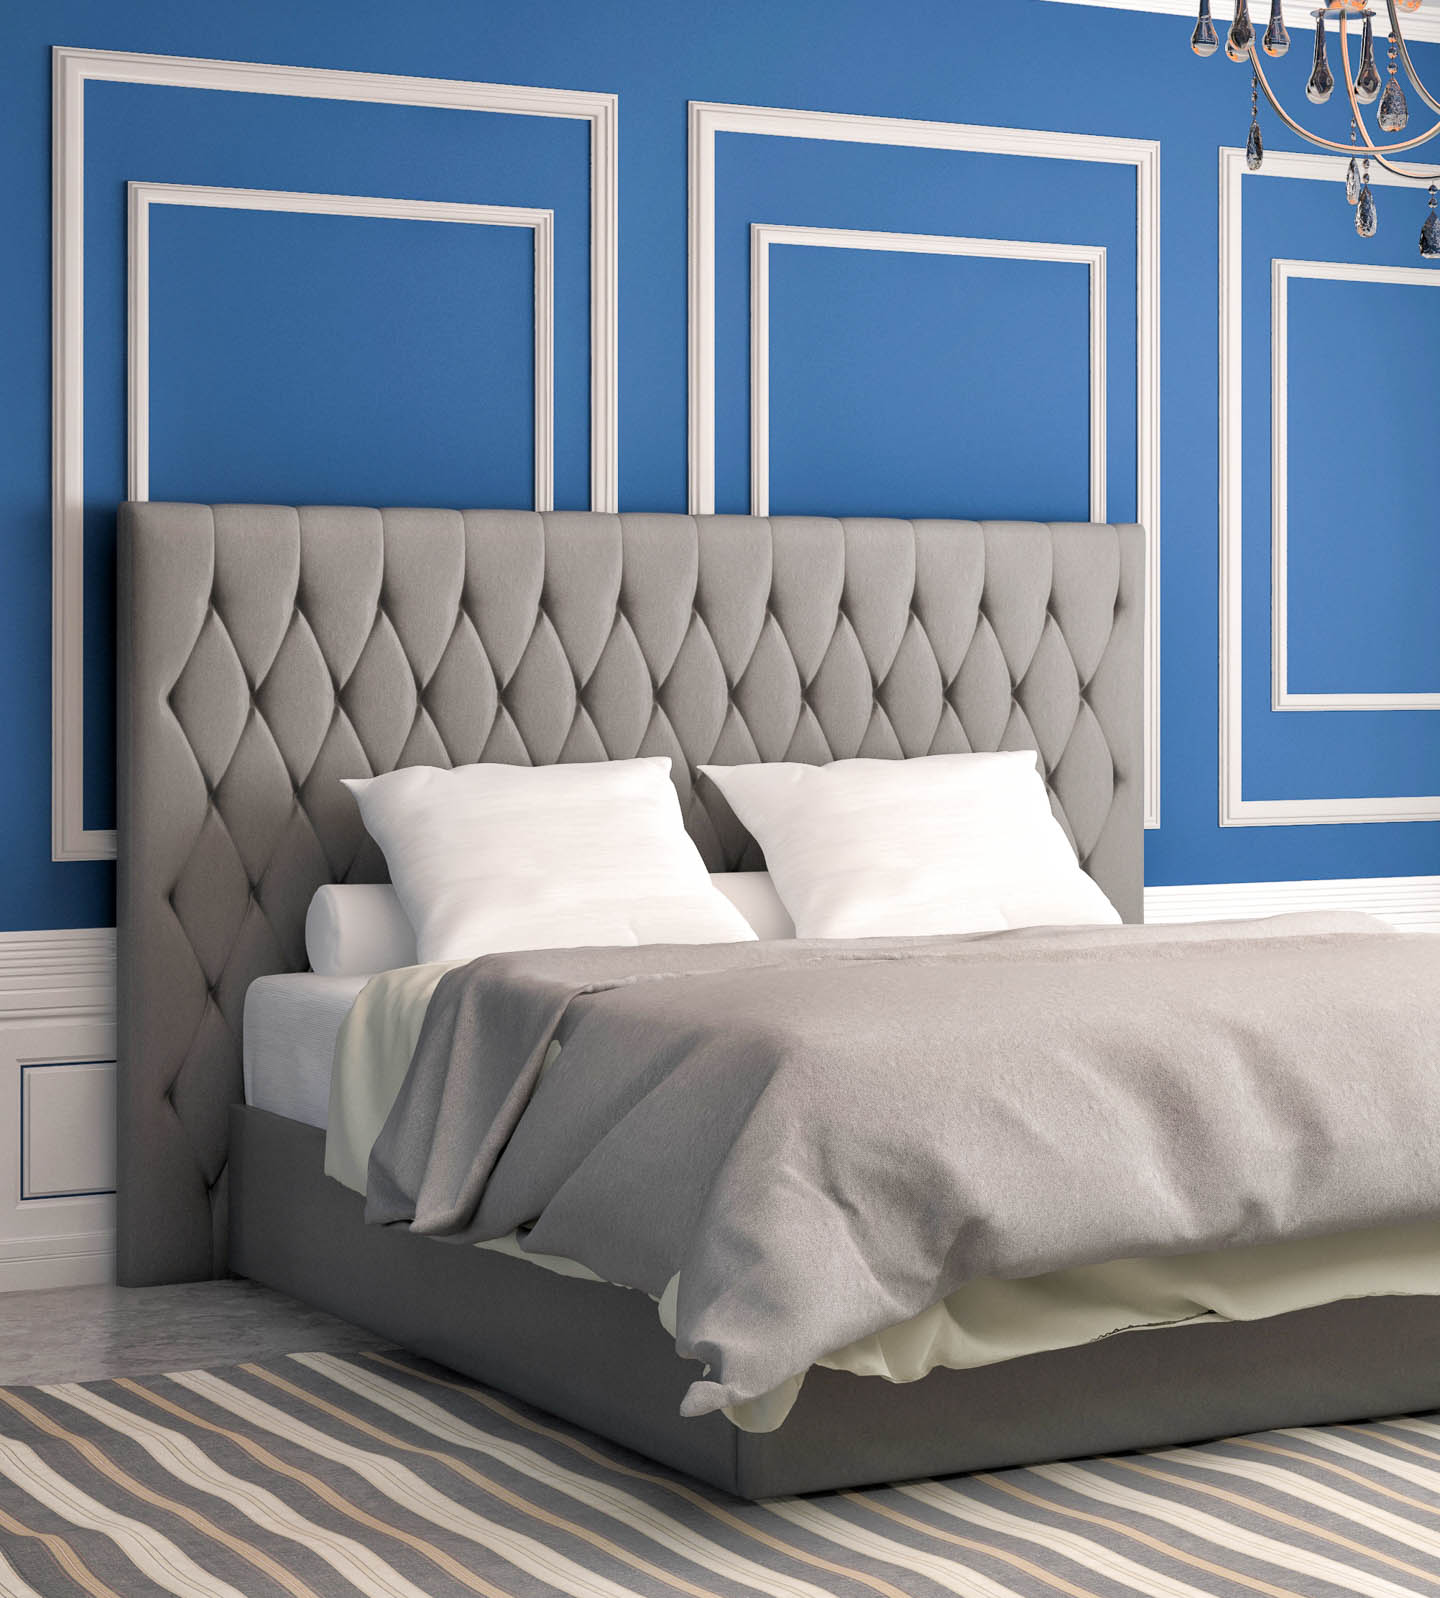 Bedroom with royal blue walls, white wainscoting and a gray bed and rug